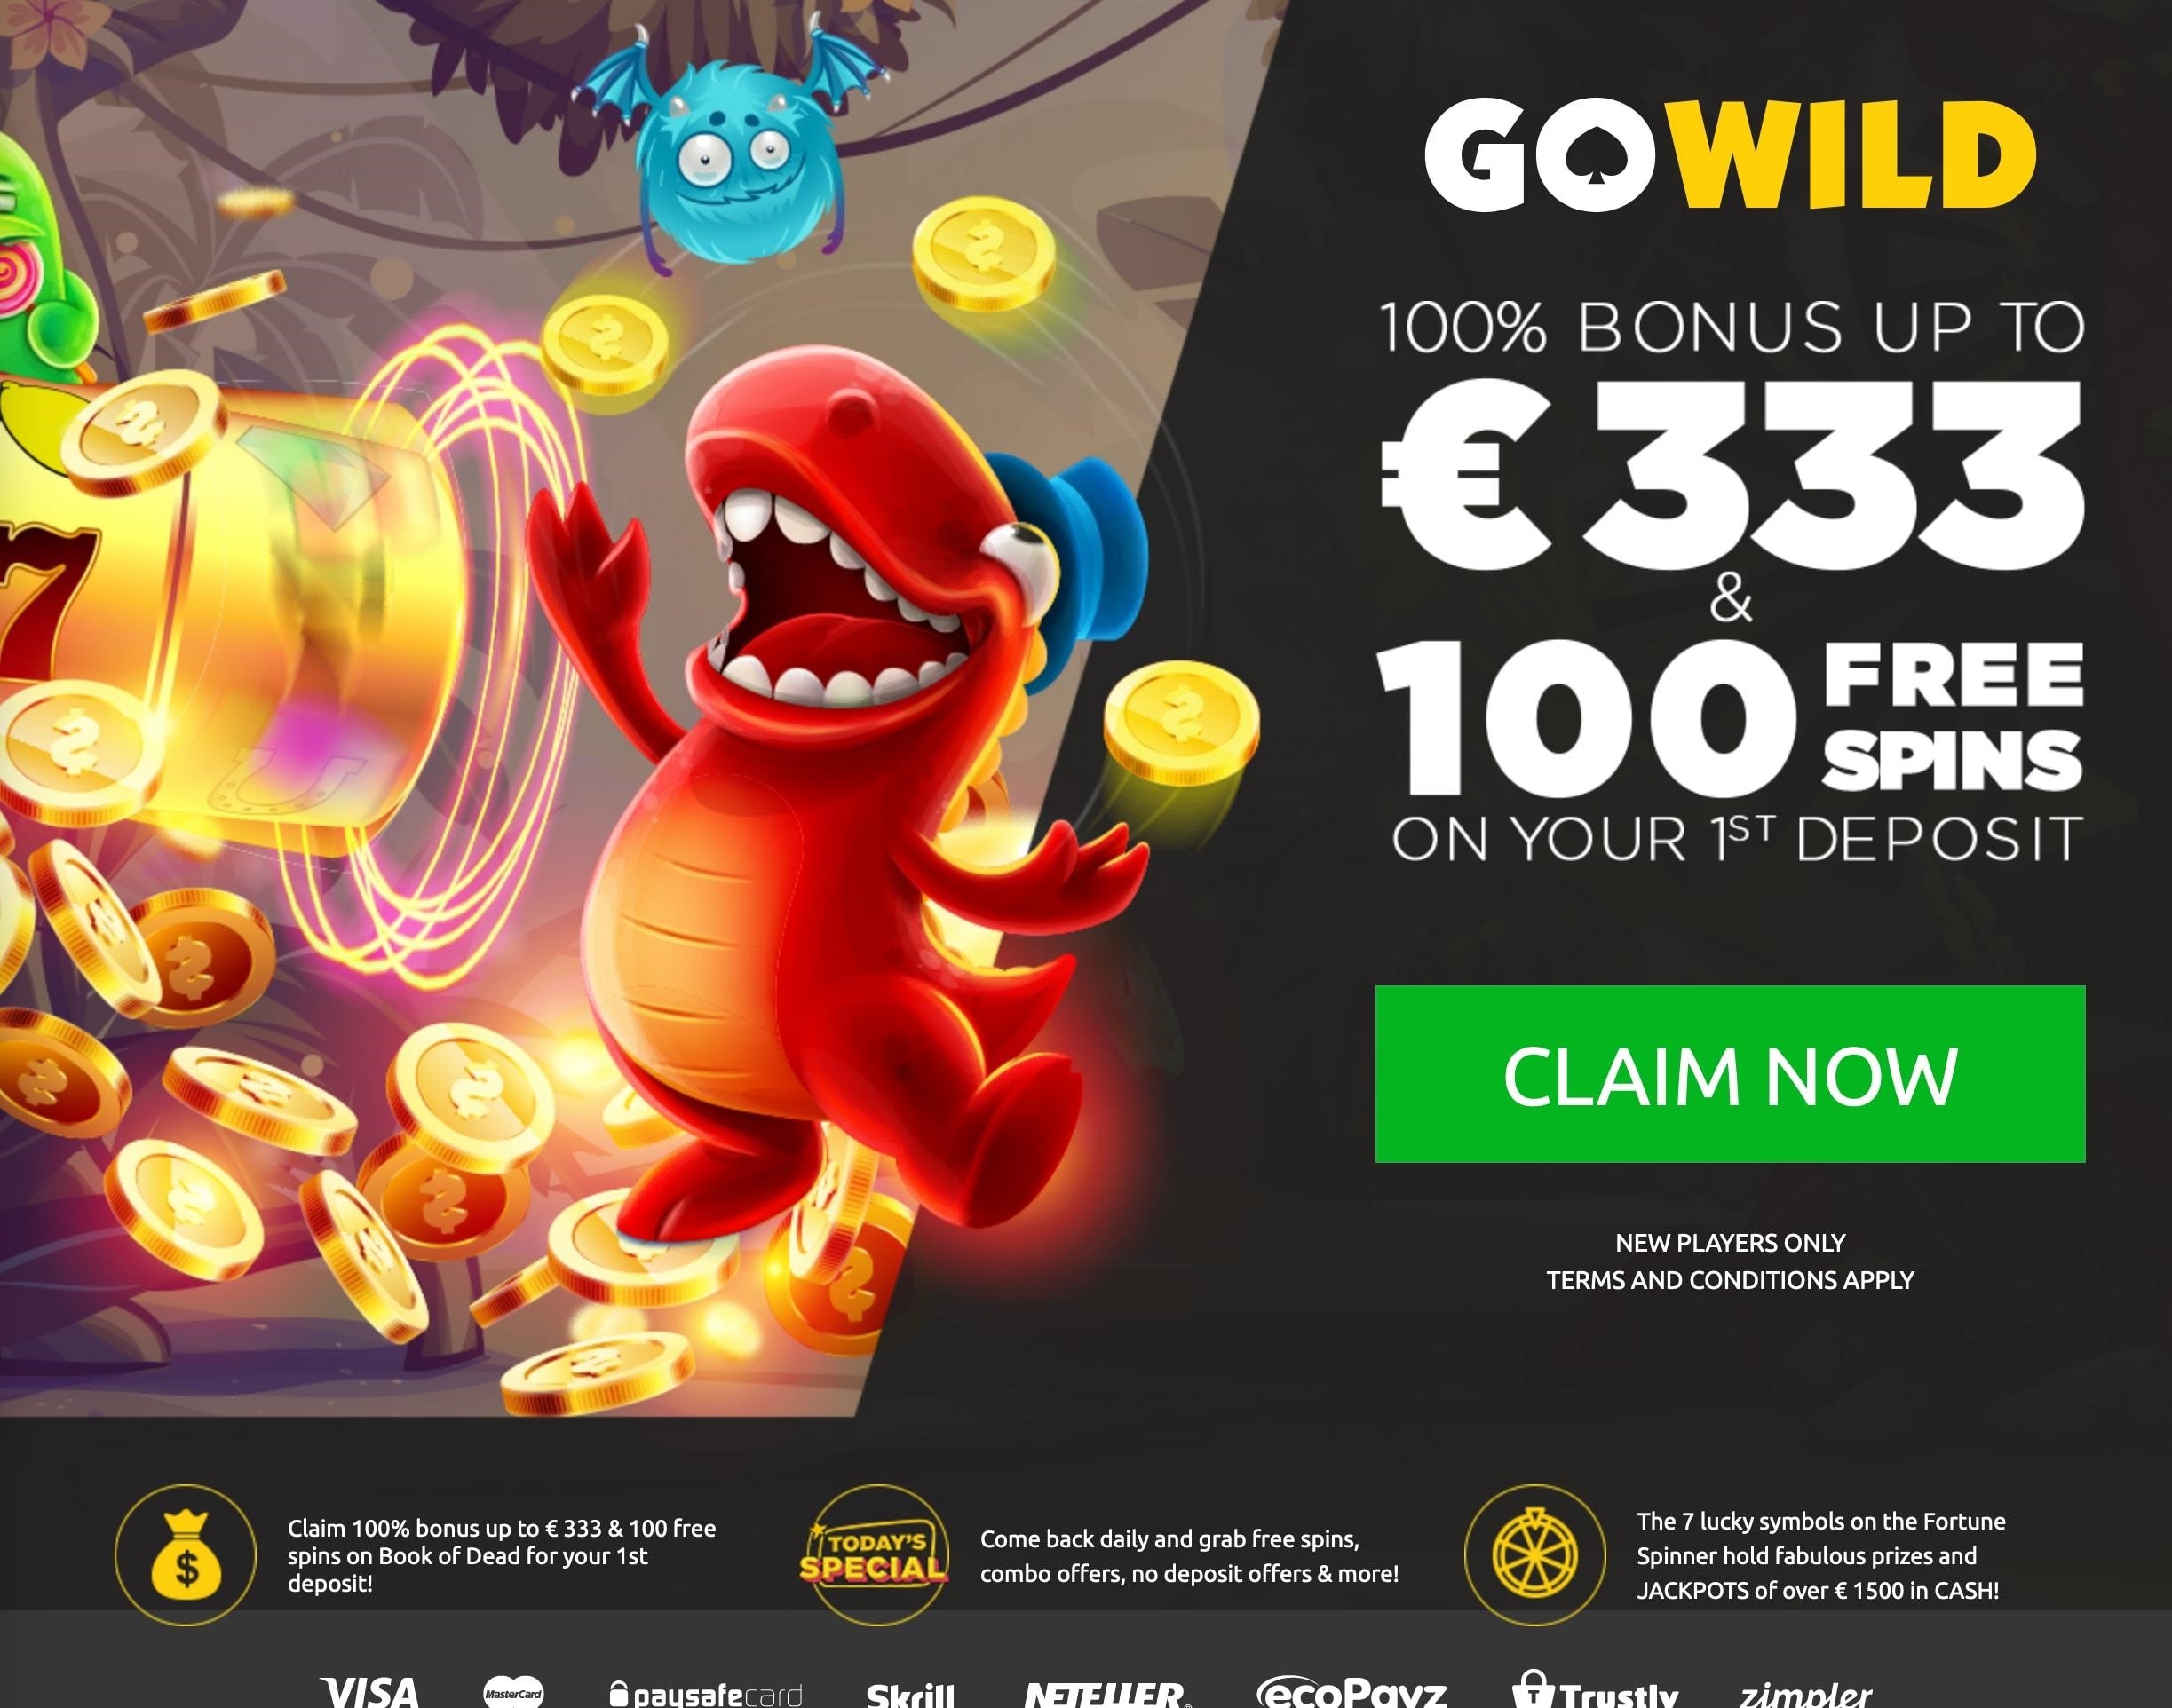 BetRegal Casino Bonuses and Promotions